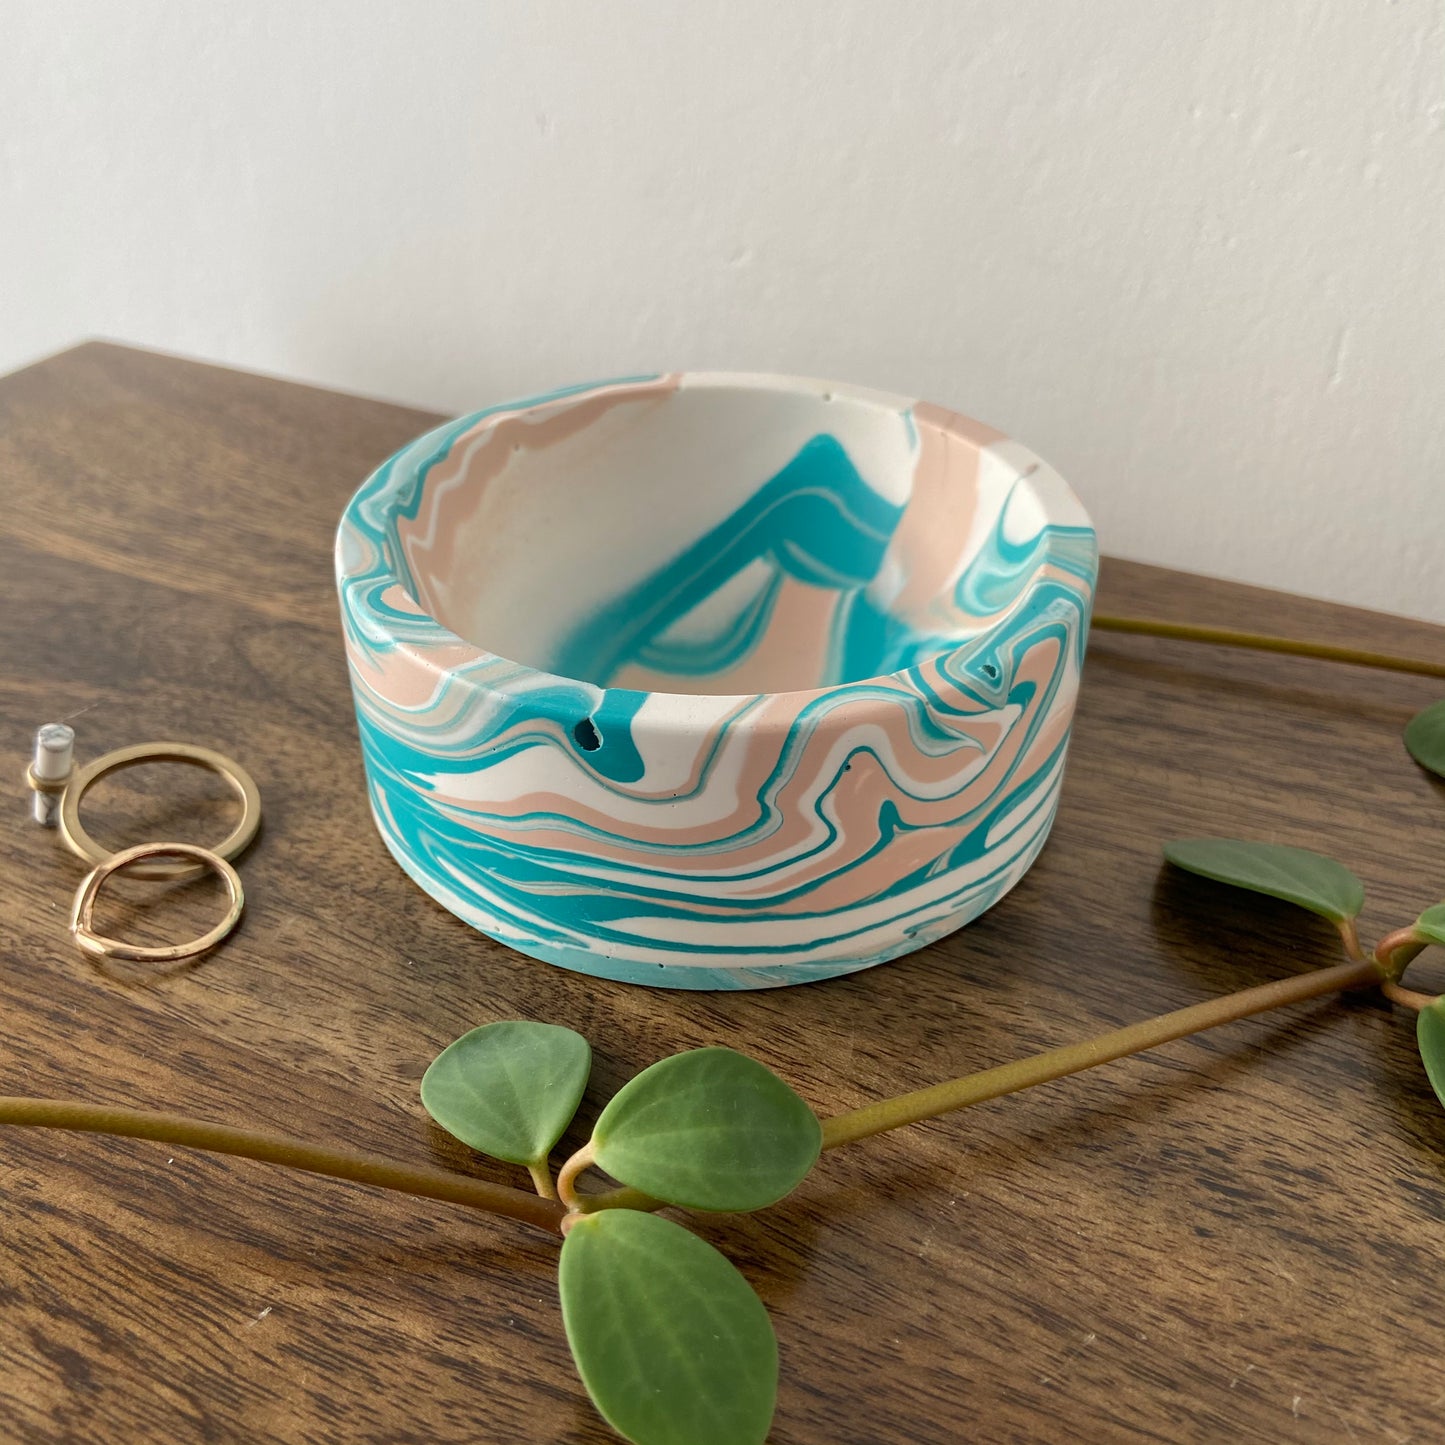 Trinket dish in marbled teal, white + pink